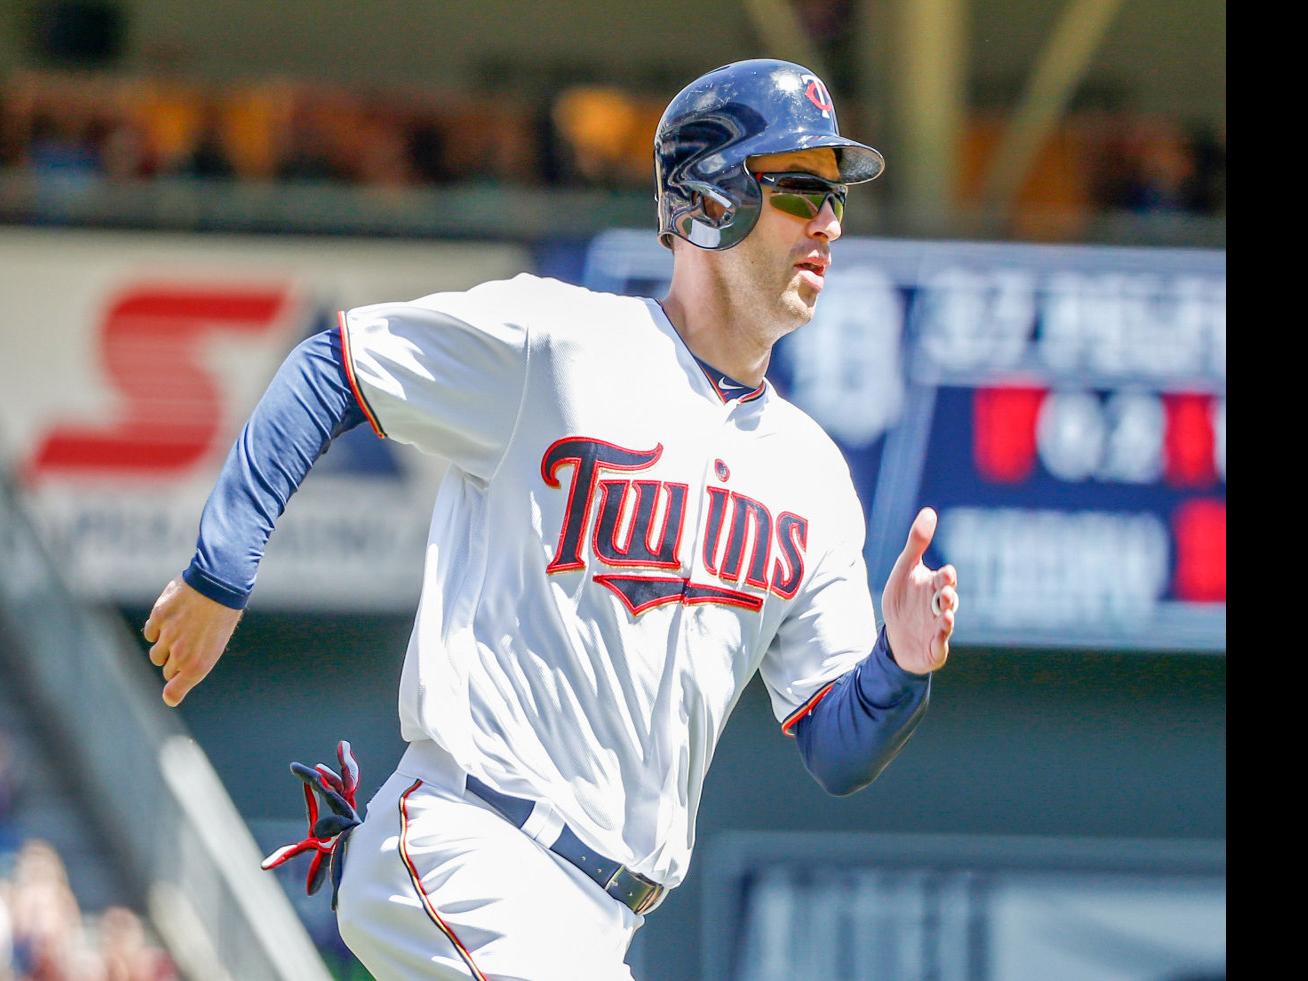 Tigers drop fourth straight, fall to Twins in 10 innings – The